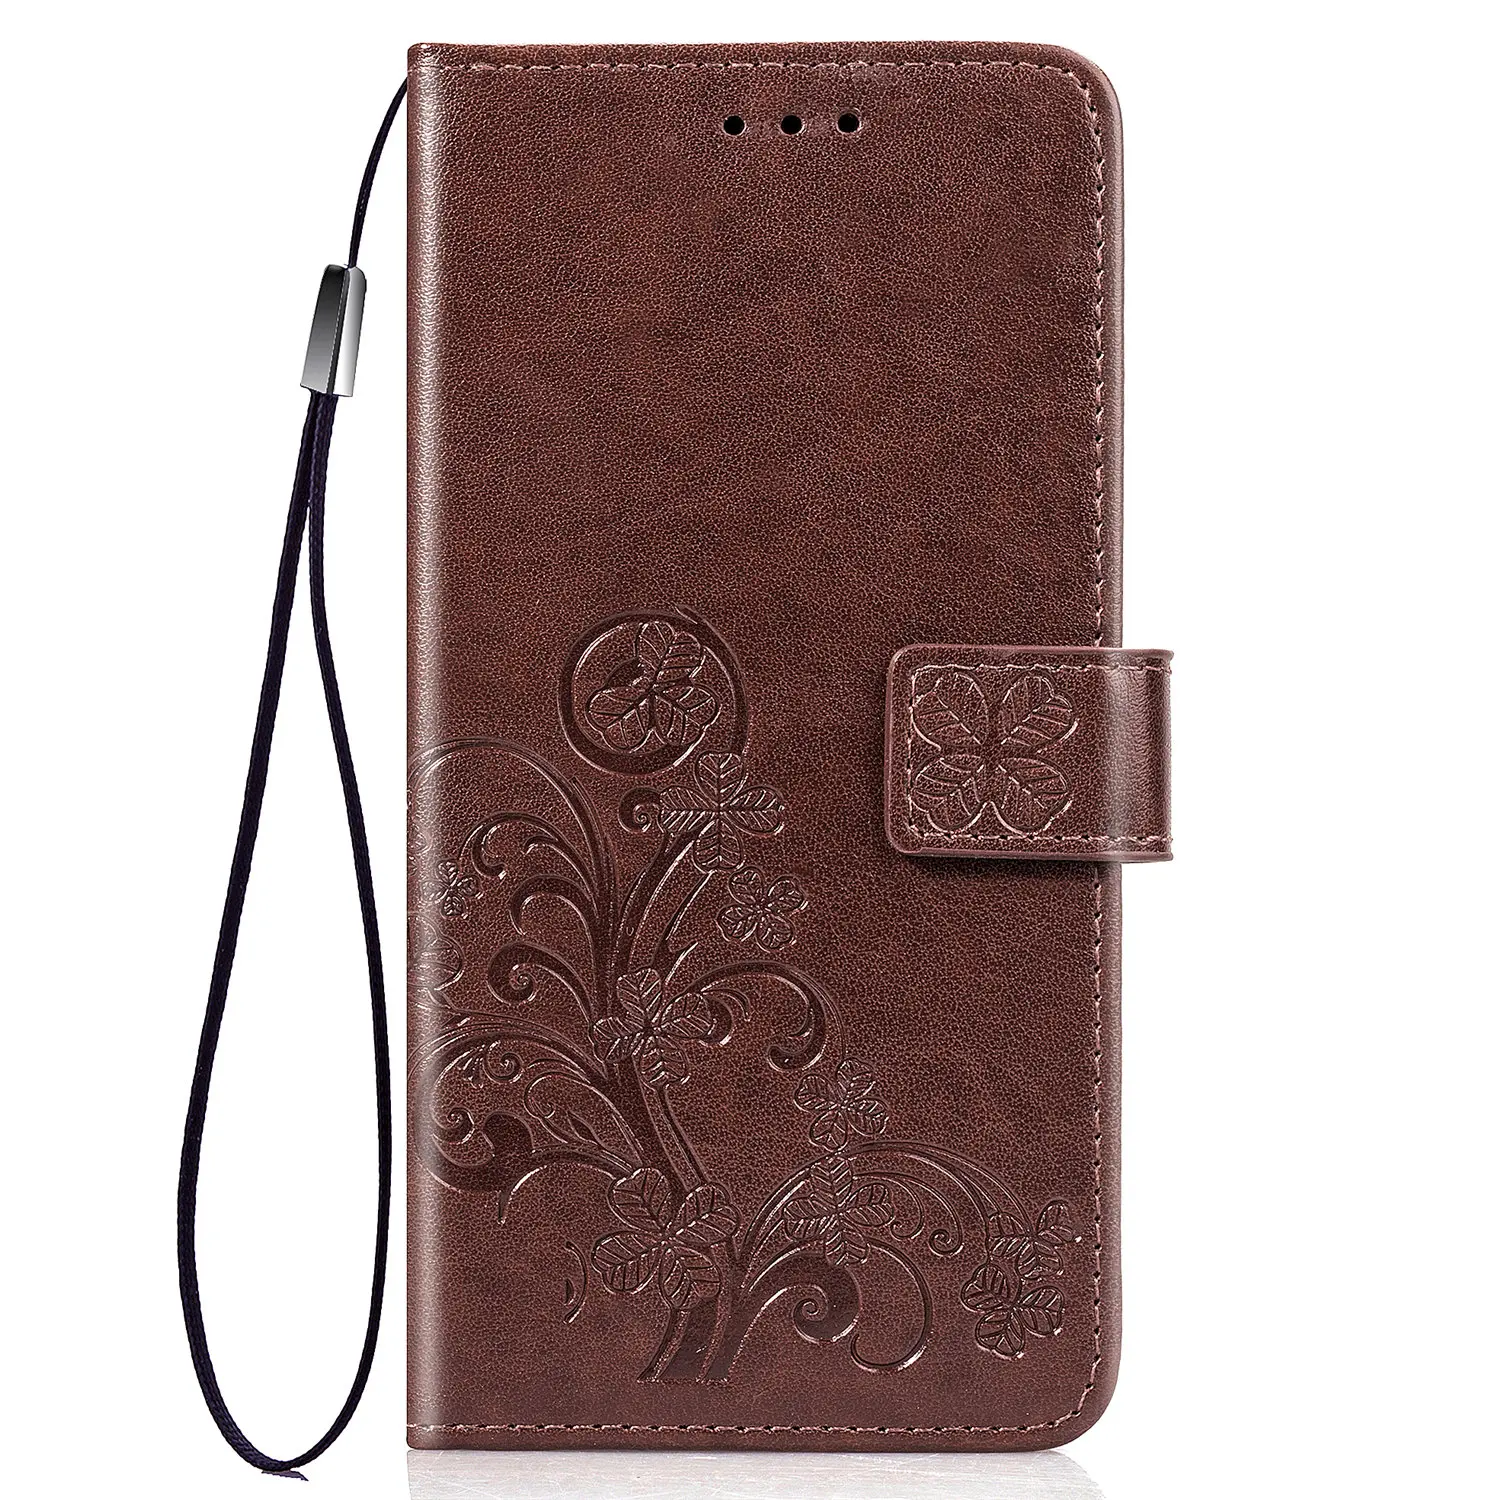 

Flip Case Luxury Pu Leather Wallet Phone Case Tpu Soft Silicone Back Cover for LG G3 Stylus D690N D690 Business Case